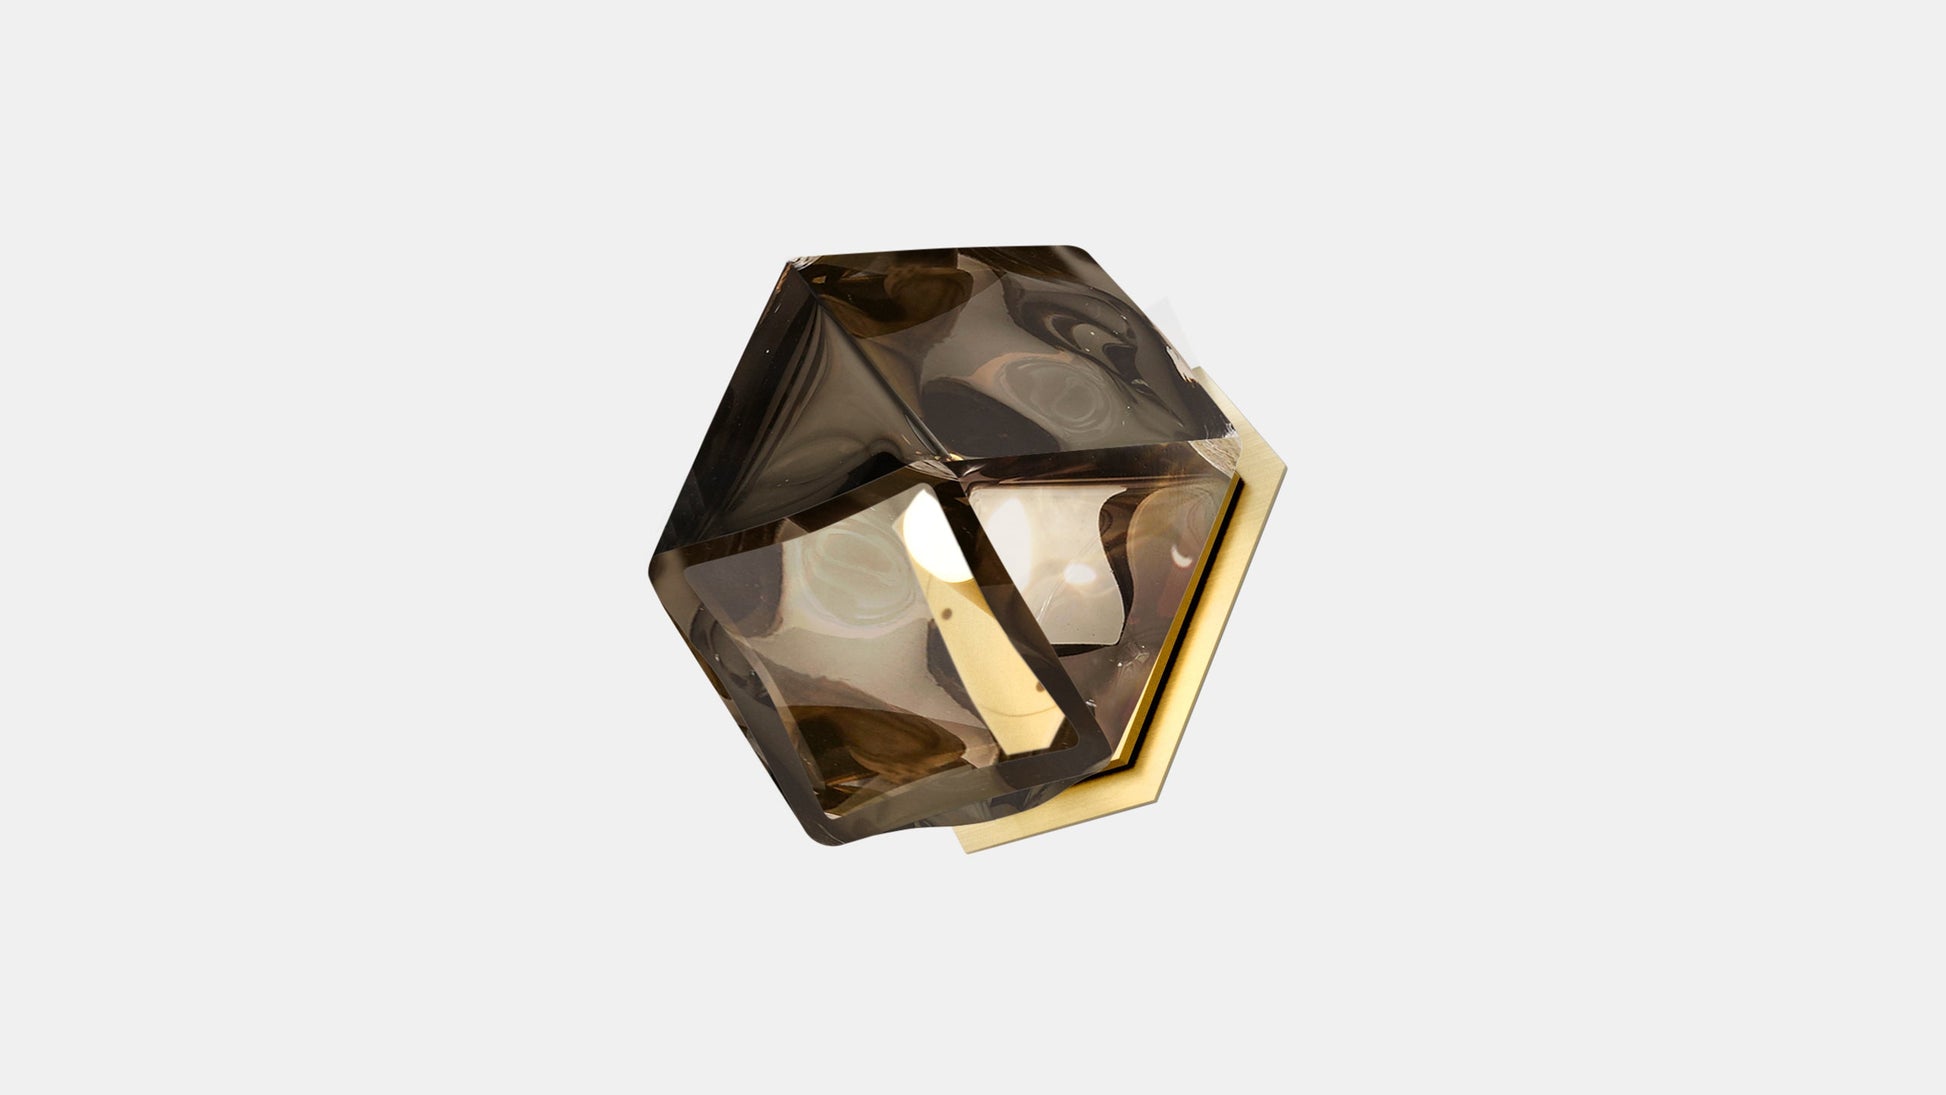 Welles Flushmount Sconce Brass   Smoked